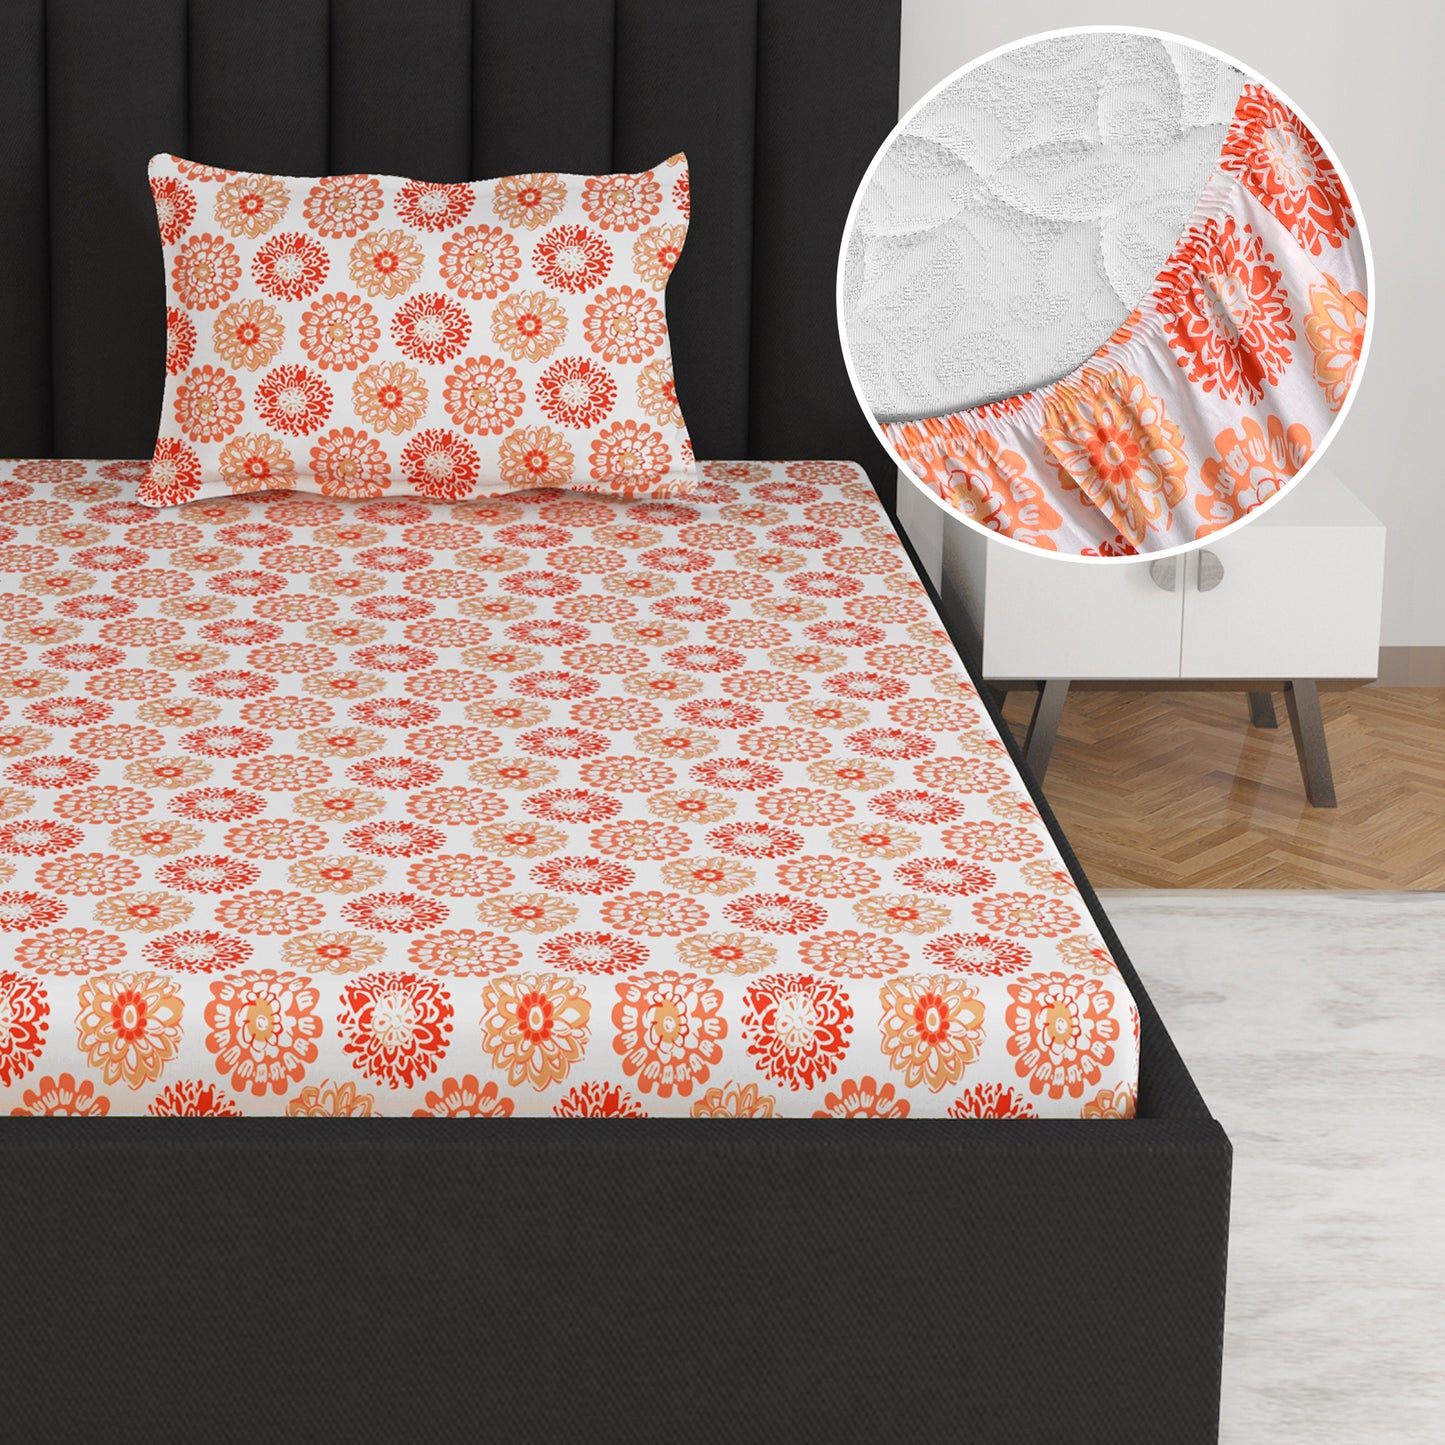 Summer Dahlia Floral Printed Elastic Fitted Bedsheet For Single Bed